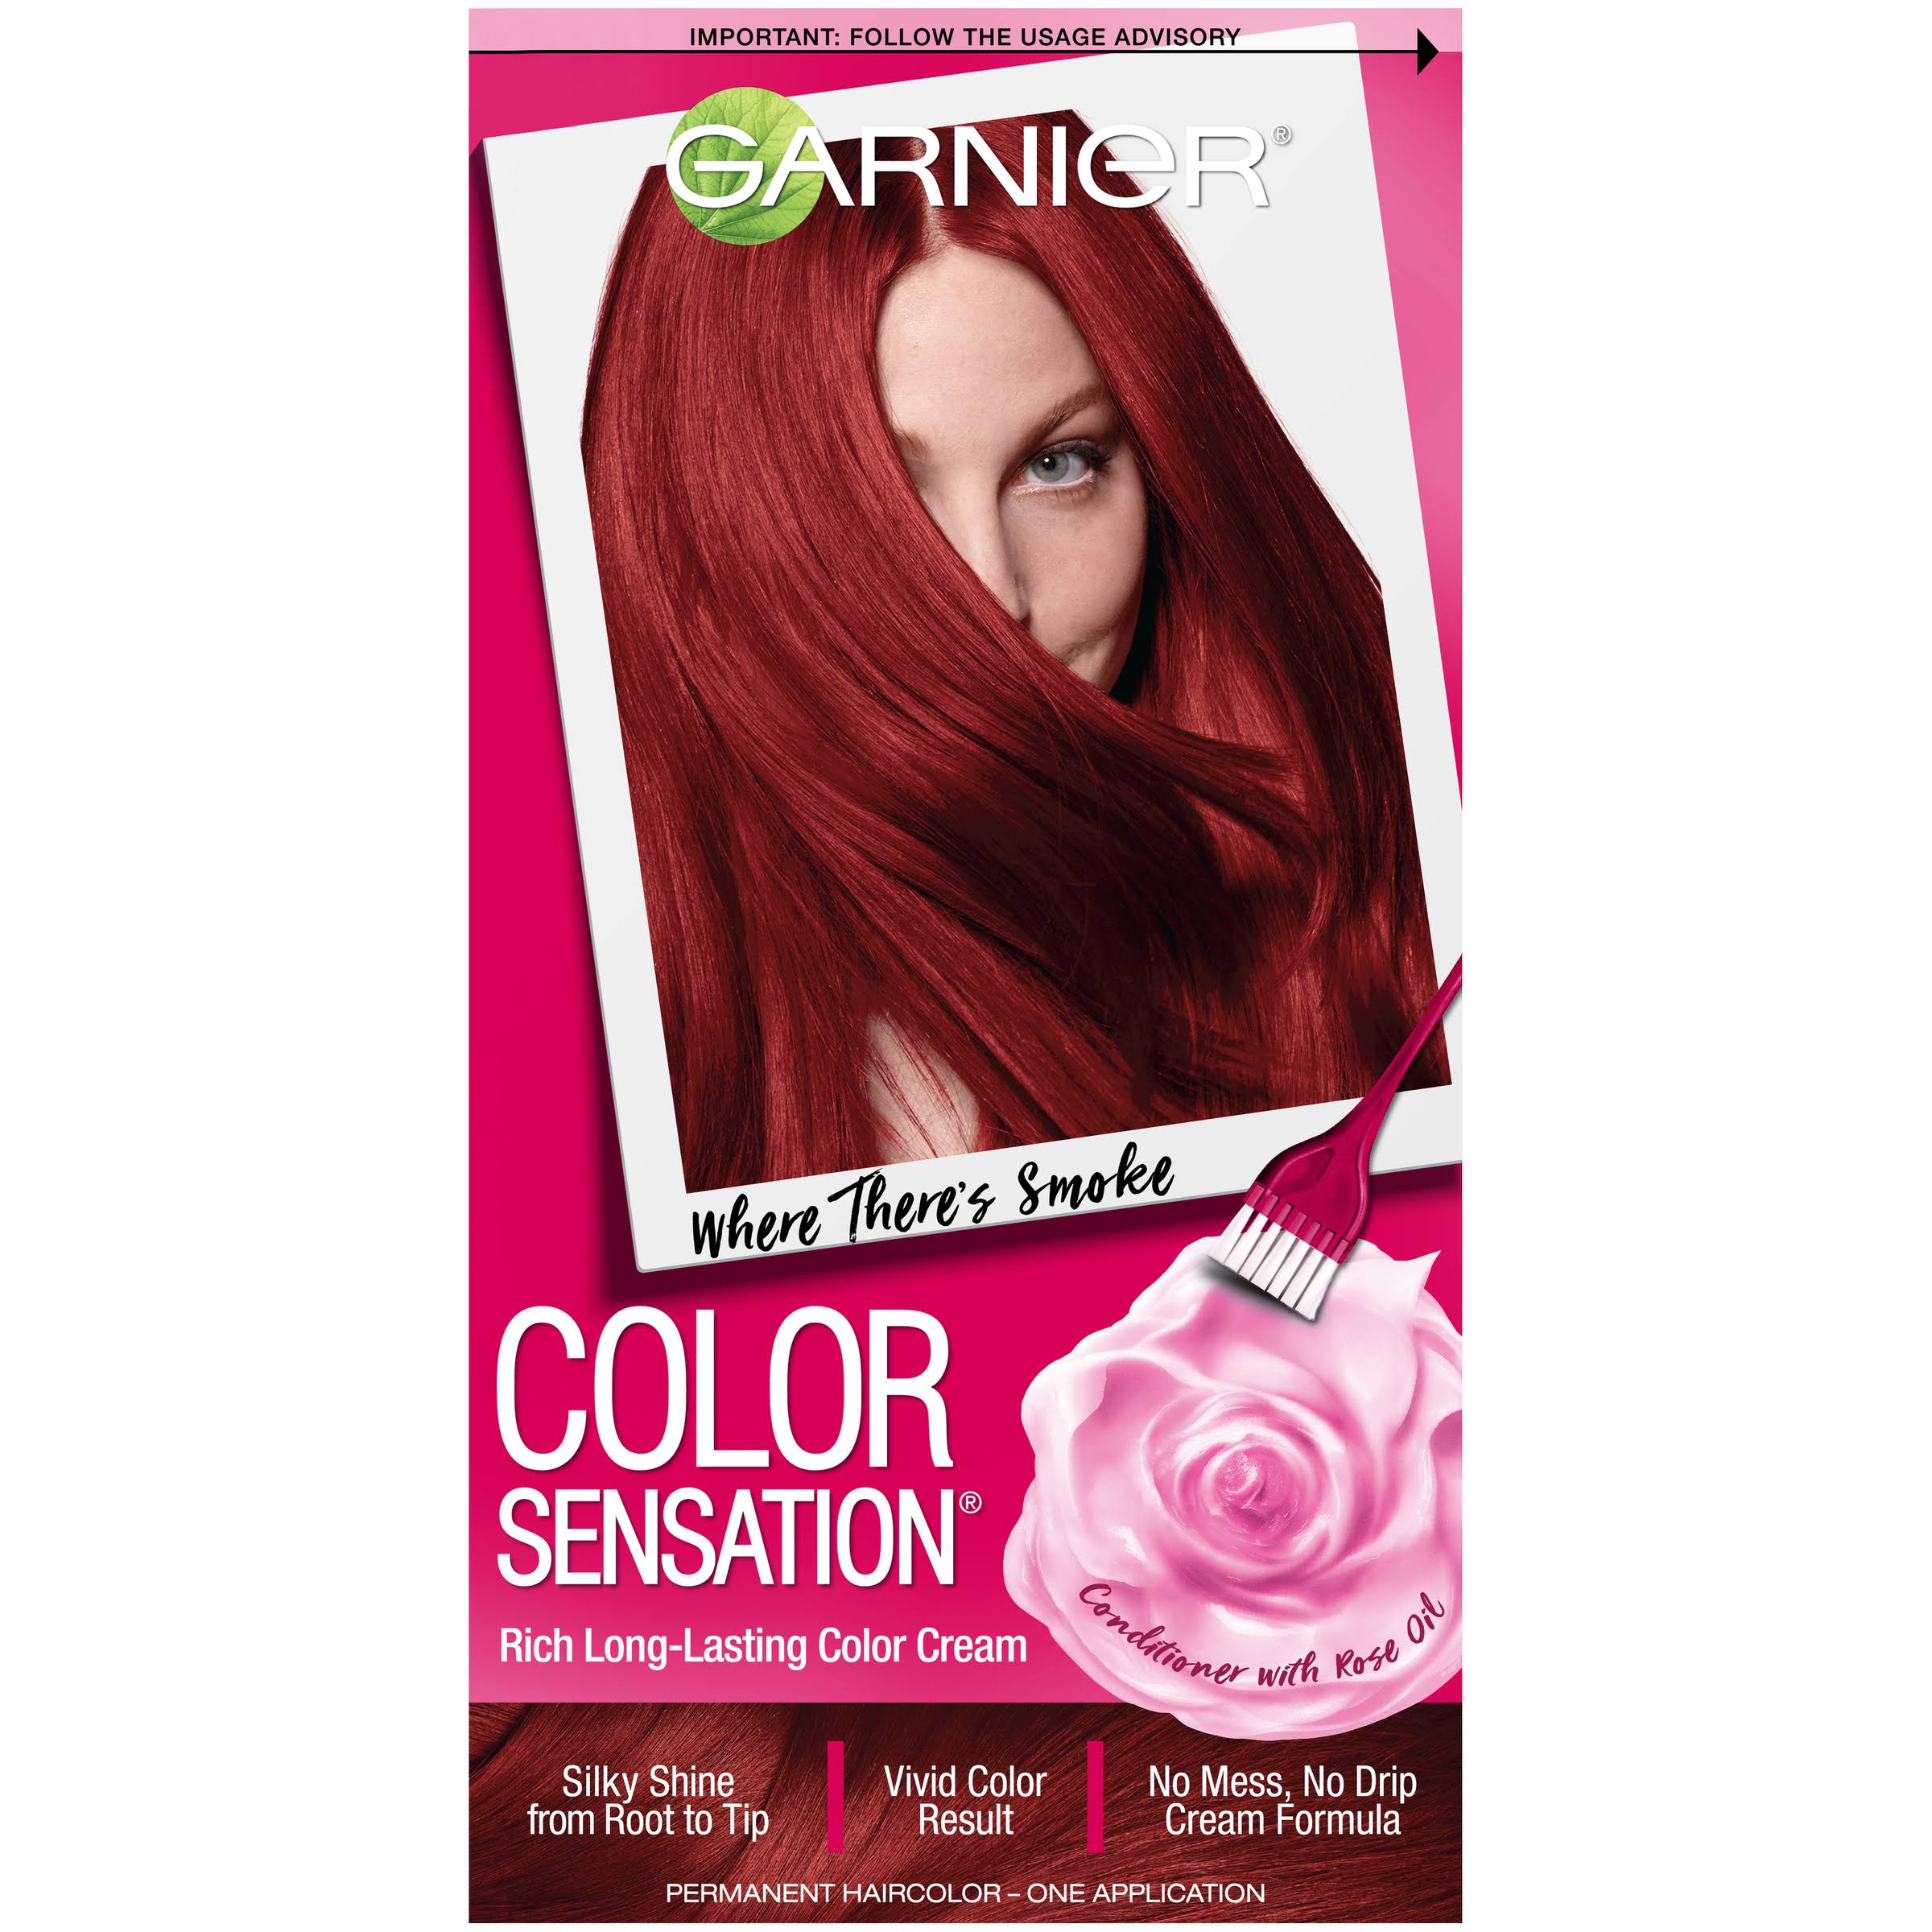 Garnier Color Sensation Hair Color Cream, 6.60 Where There's Smoke (Intense Fiery Red), 1 kit